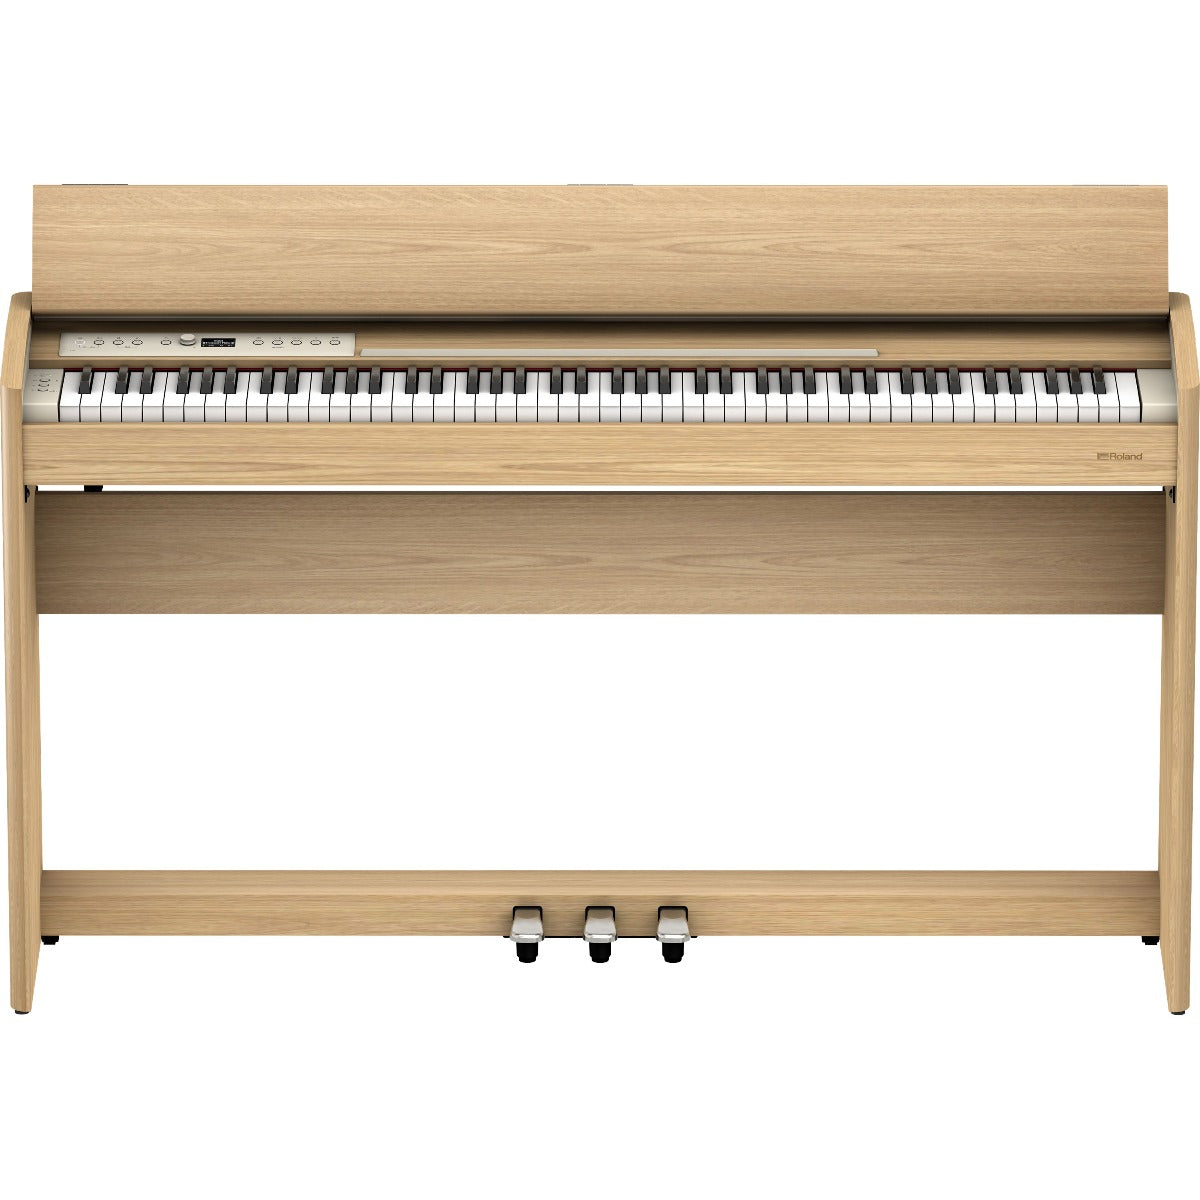 Perspective view of Roland F701 Digital Piano - Light Oak showing top and front